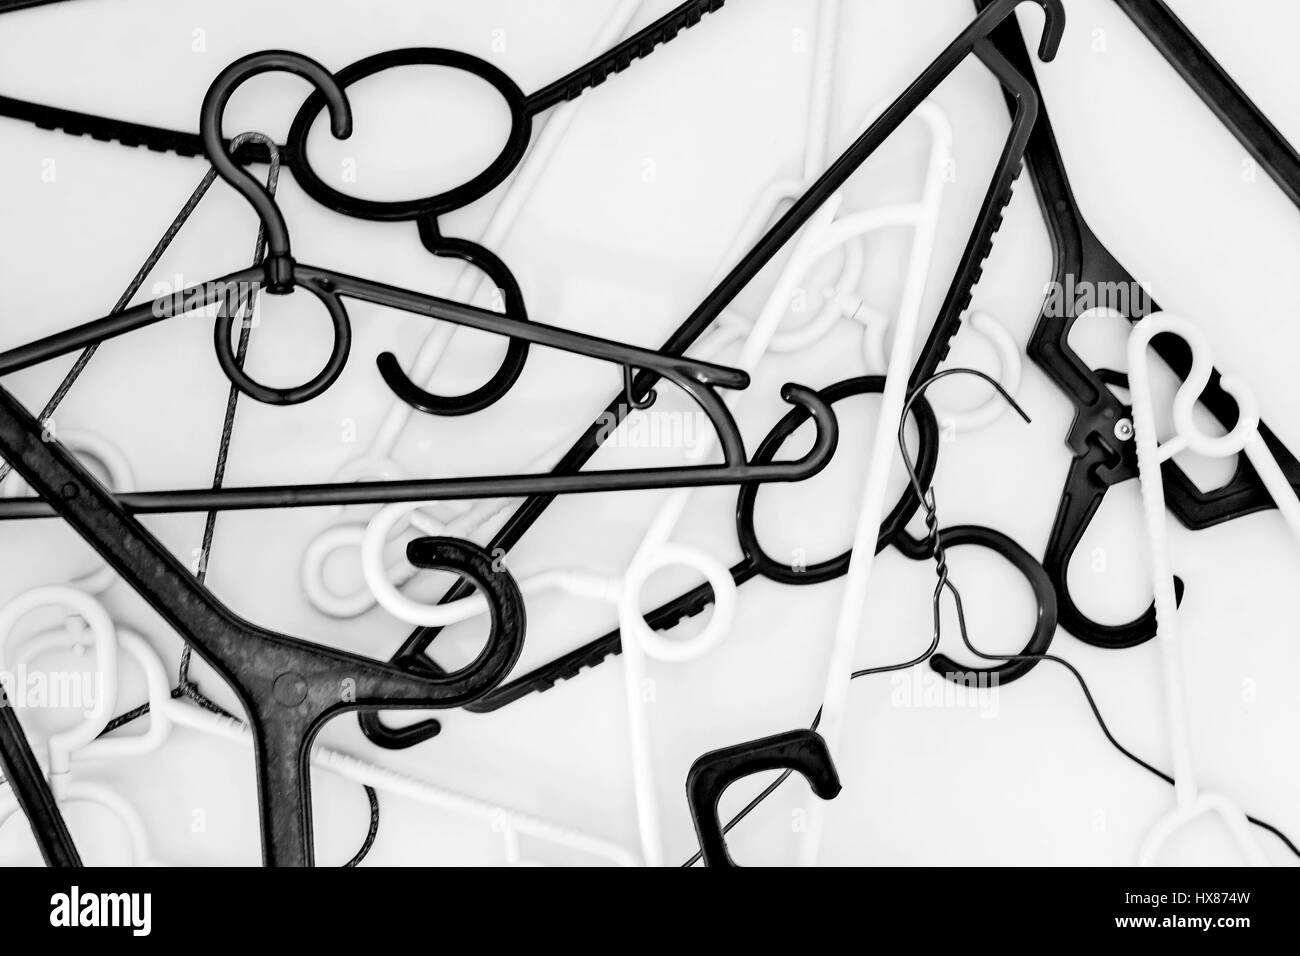 Many hangers of different shapes and colors, top view, white background. Stock Photo